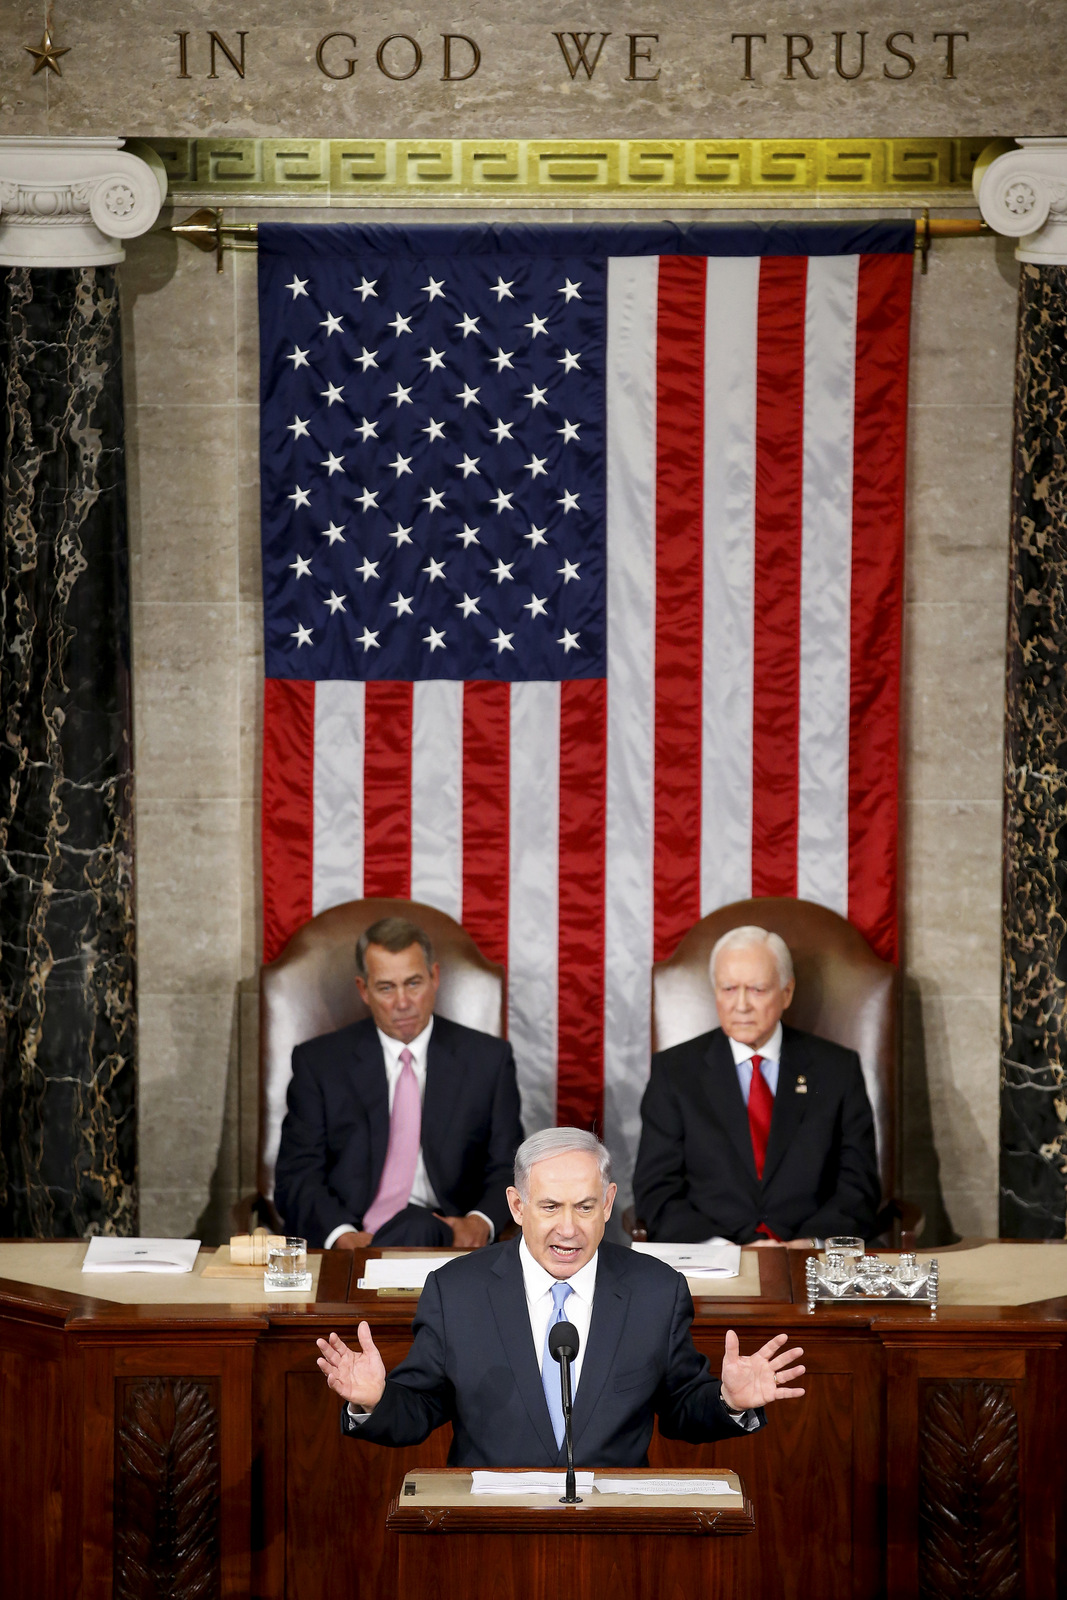 Israeli Prime Minister Benjamin Netanyahu speaks before a joint meeting of Congress on Capitol Hill in Washington, Tuesday, March 3, 2015.